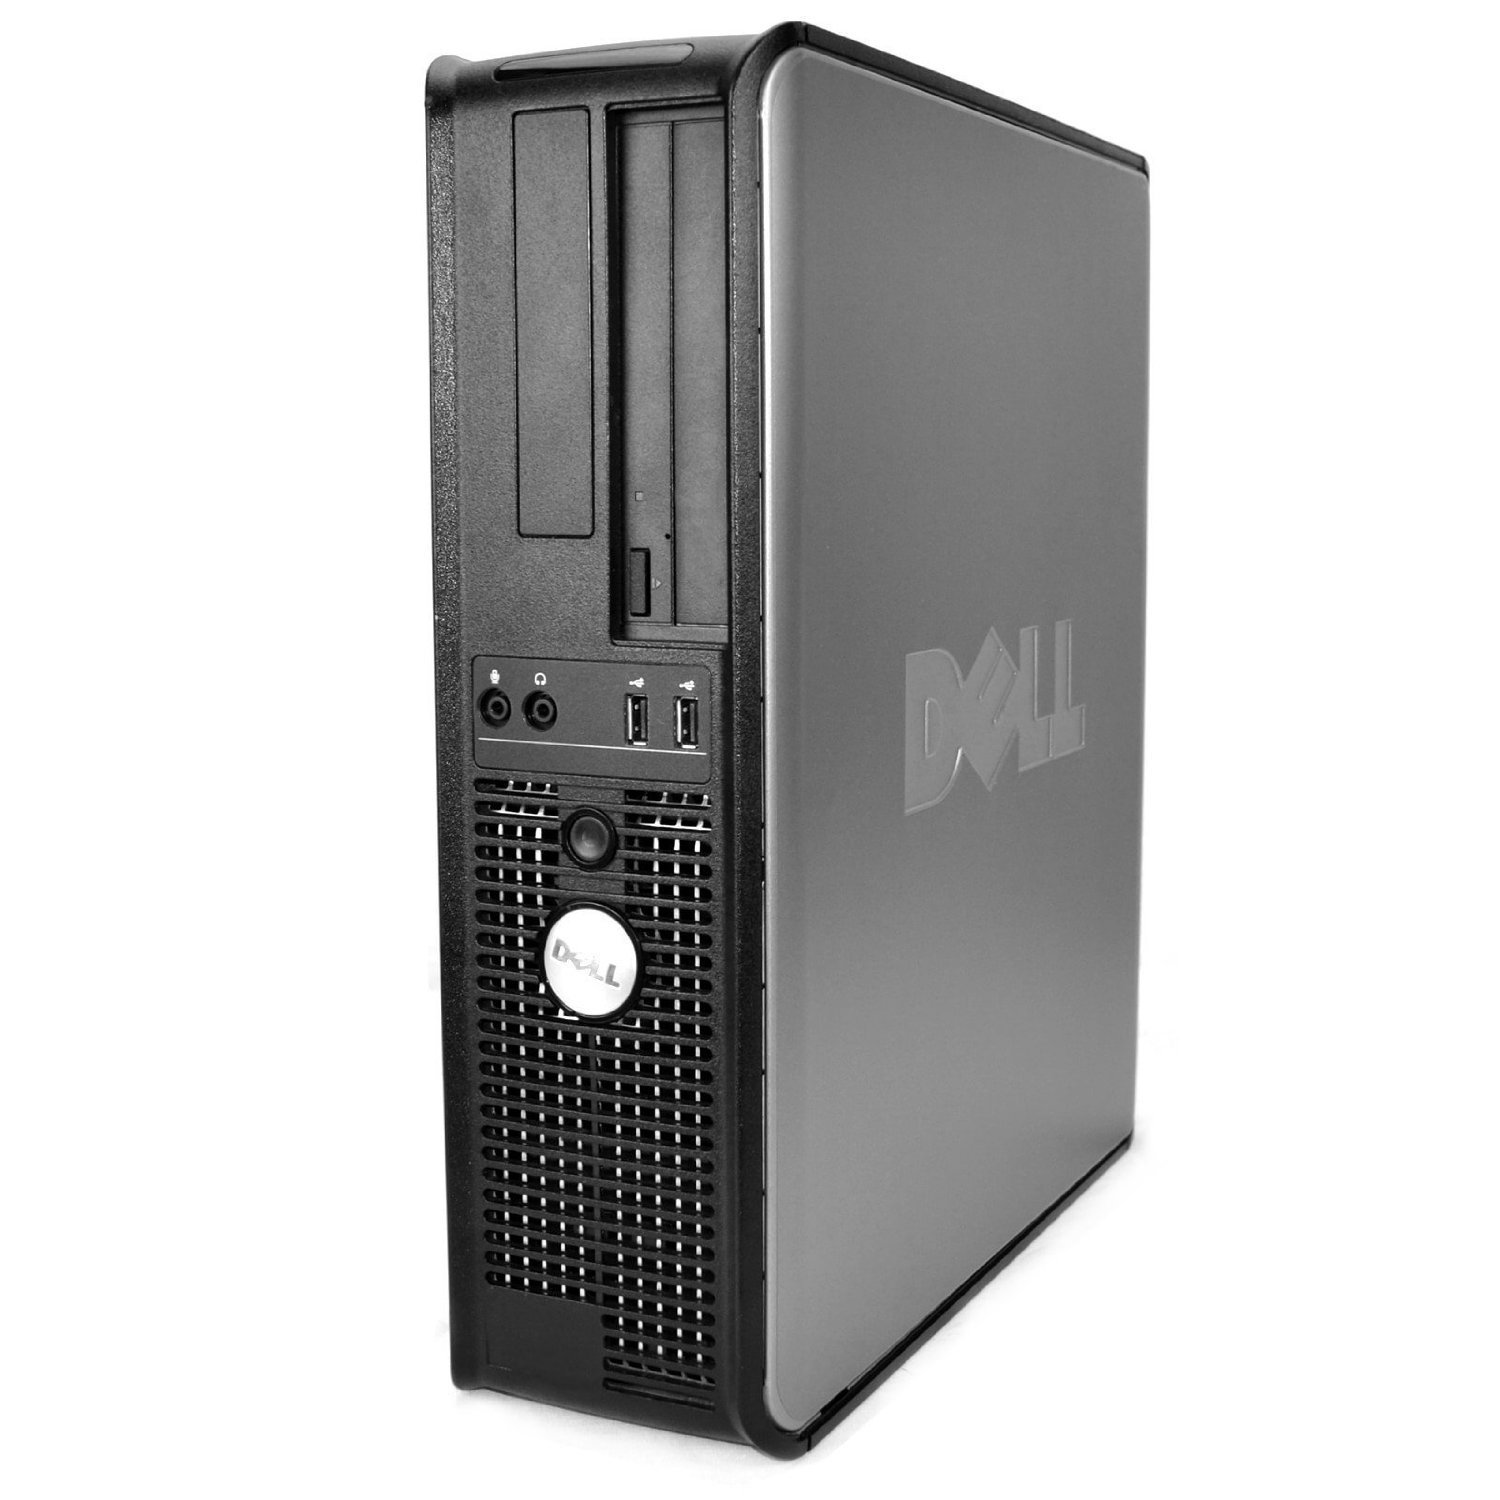 Restored DellOptiplex Desktop Computer 2.5 GHz Core 2 Duo Tower PC, 8GB, 160GB HDD, Windows 10 x64, 19" Monitor , USB Mouse & Keyboard (Refurbished) - image 2 of 4